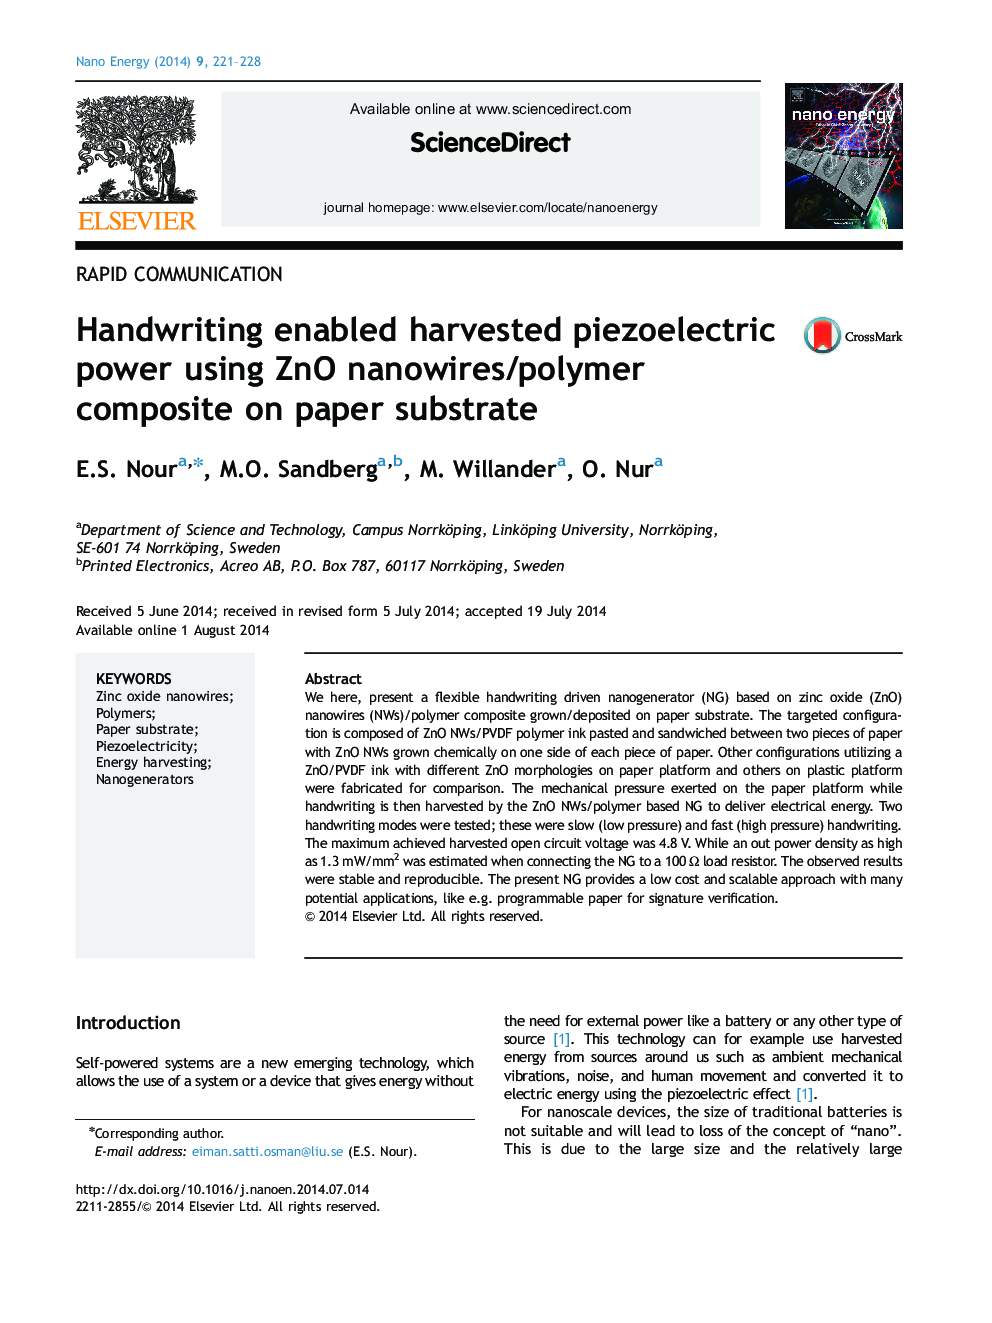 Handwriting enabled harvested piezoelectric power using ZnO nanowires/polymer composite on paper substrate